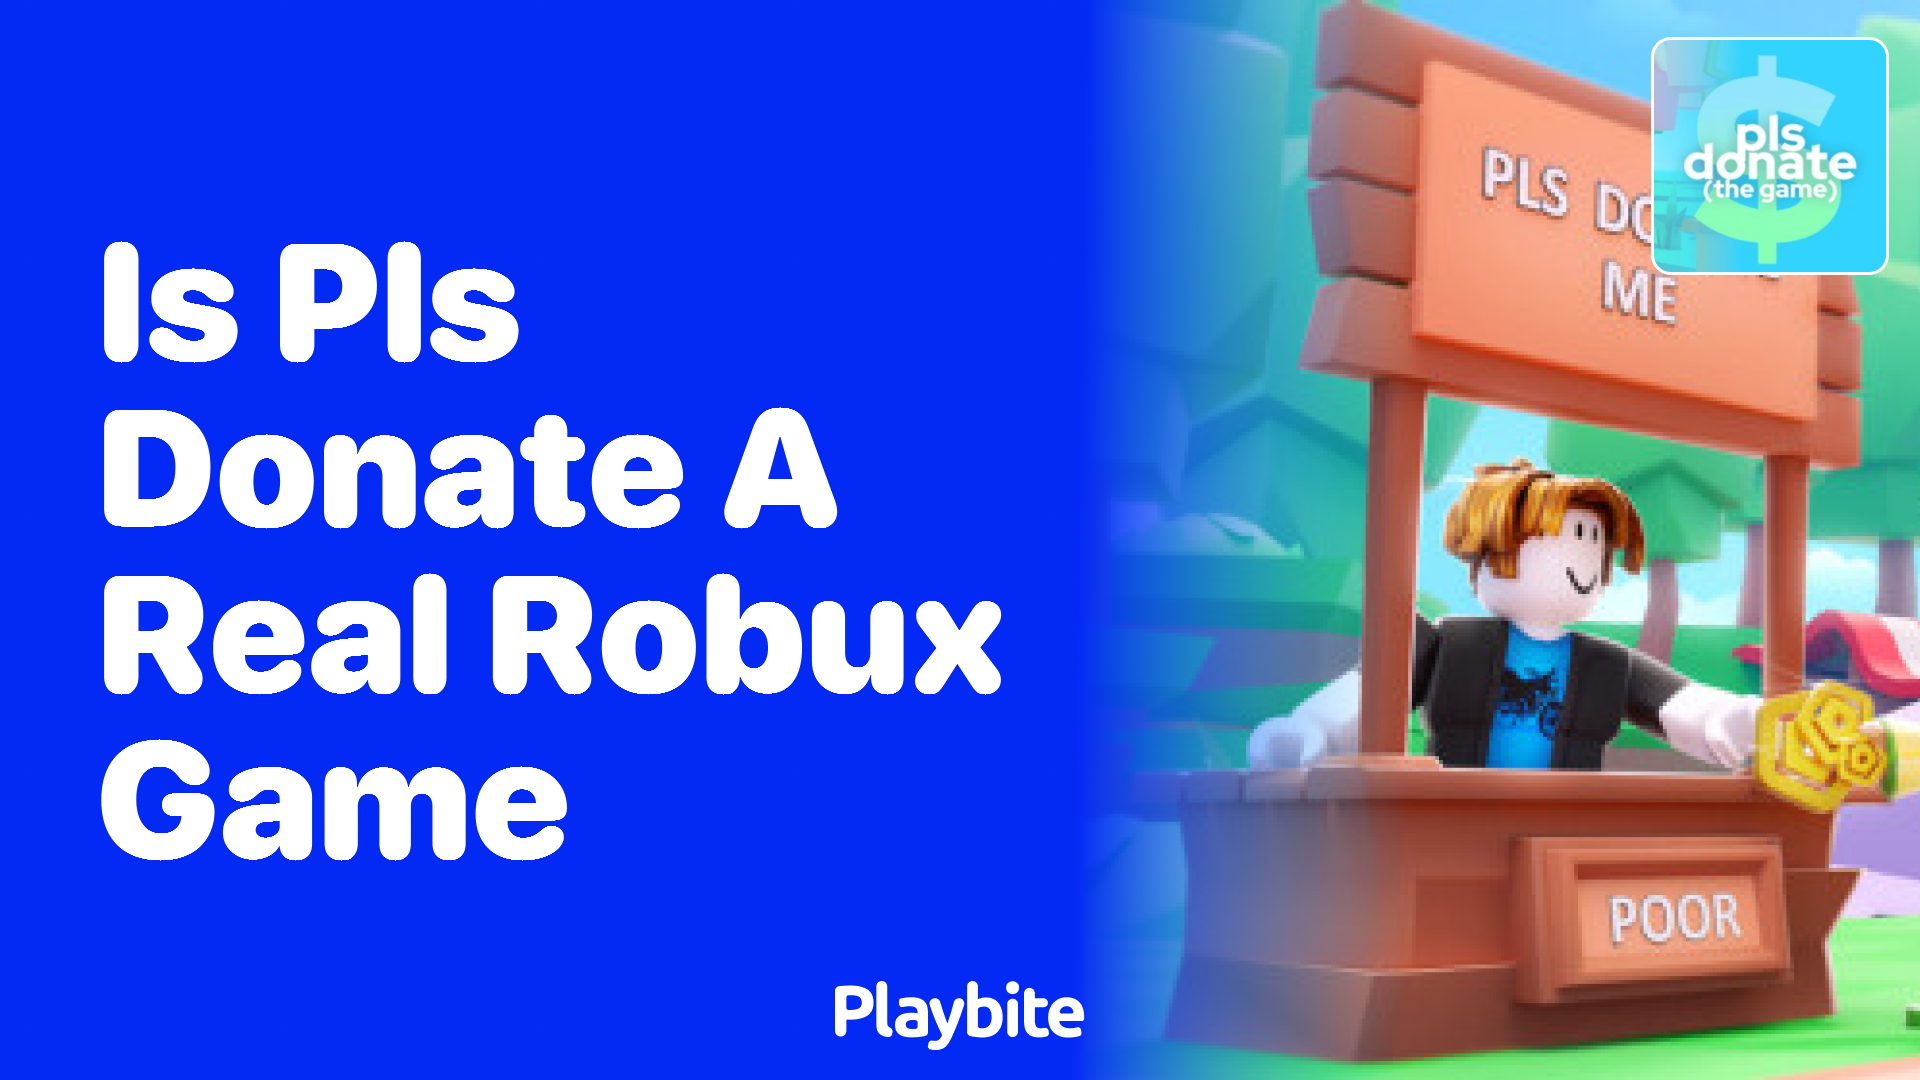 Is PLS Donate a Real Robux Game?